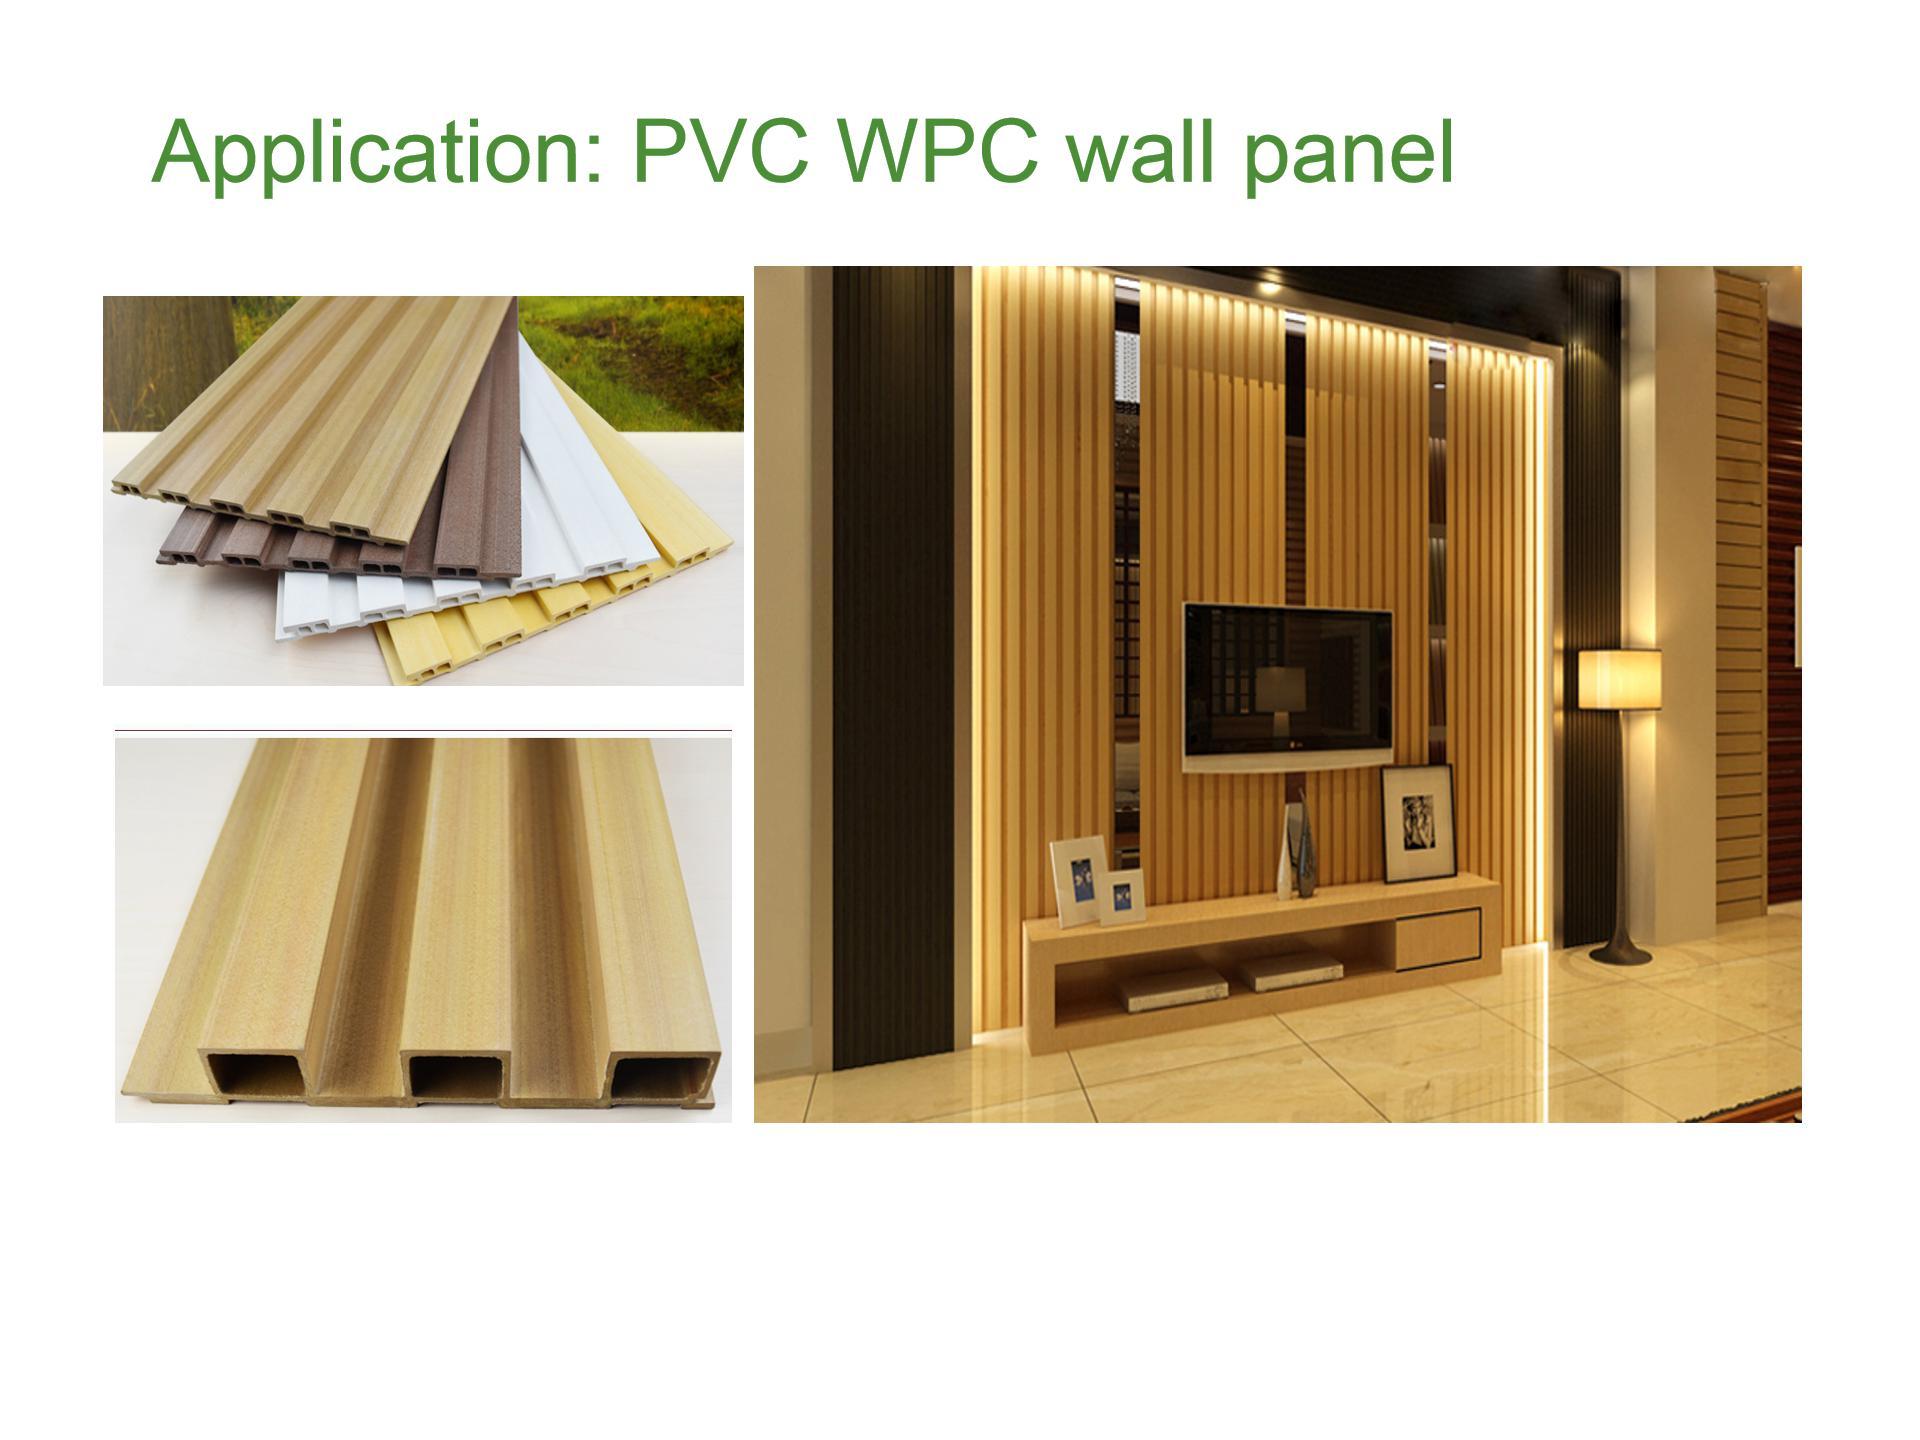 PVC WPC wall panel with color